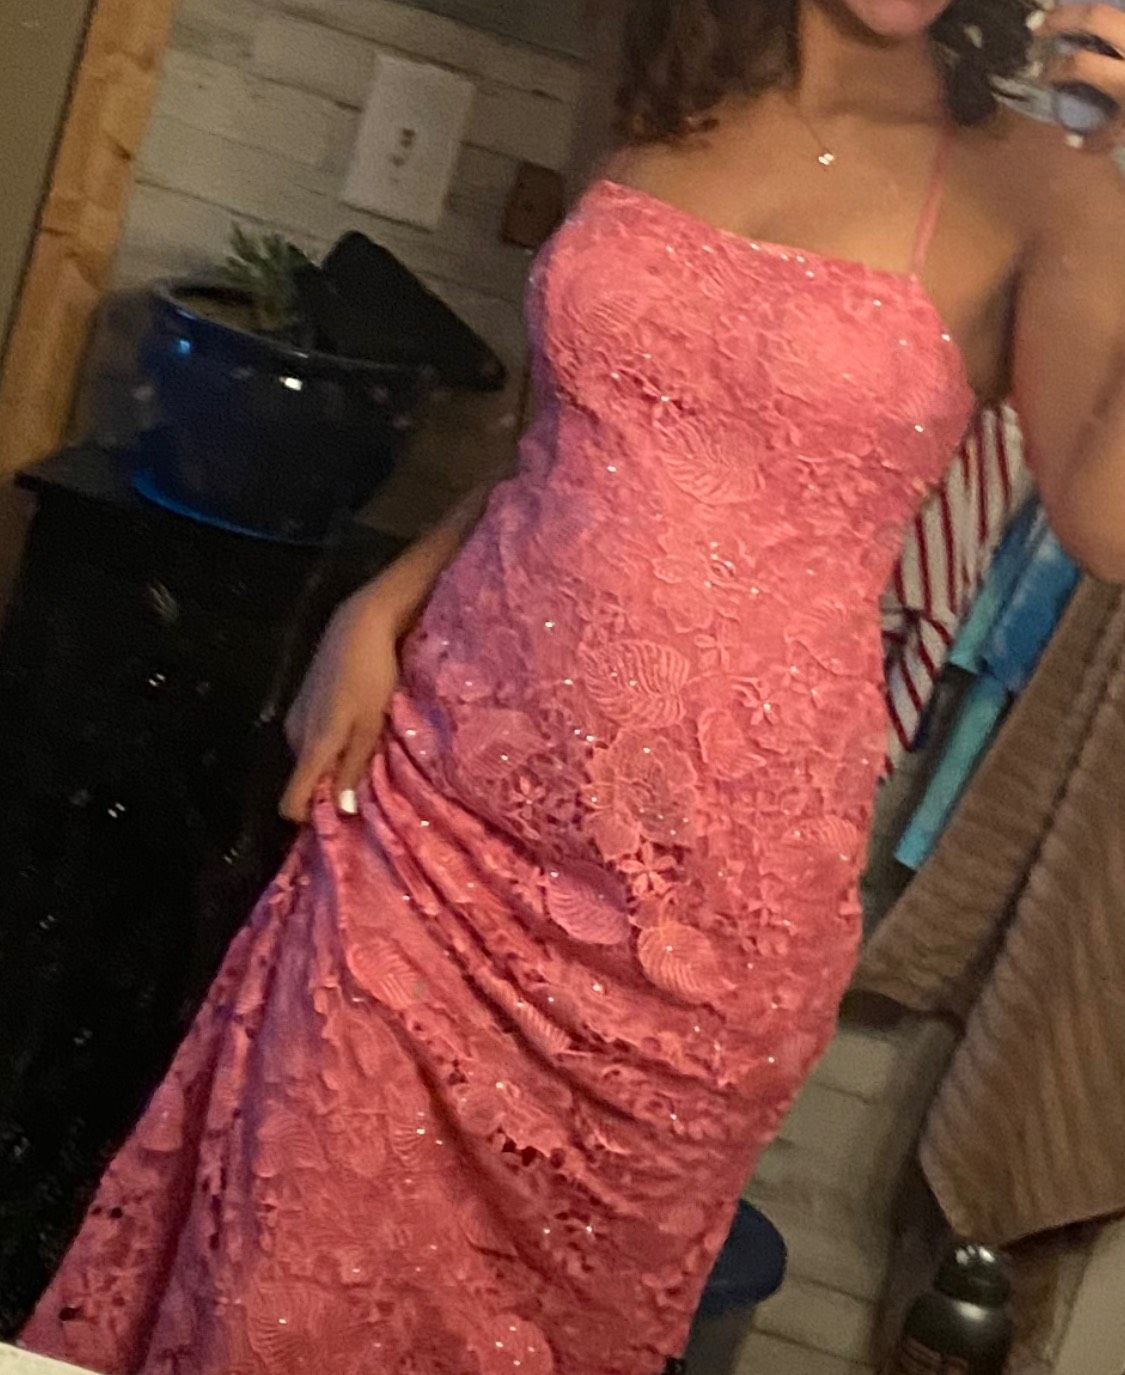 David's Bridal Size 8 Prom Pink Mermaid Dress on Queenly